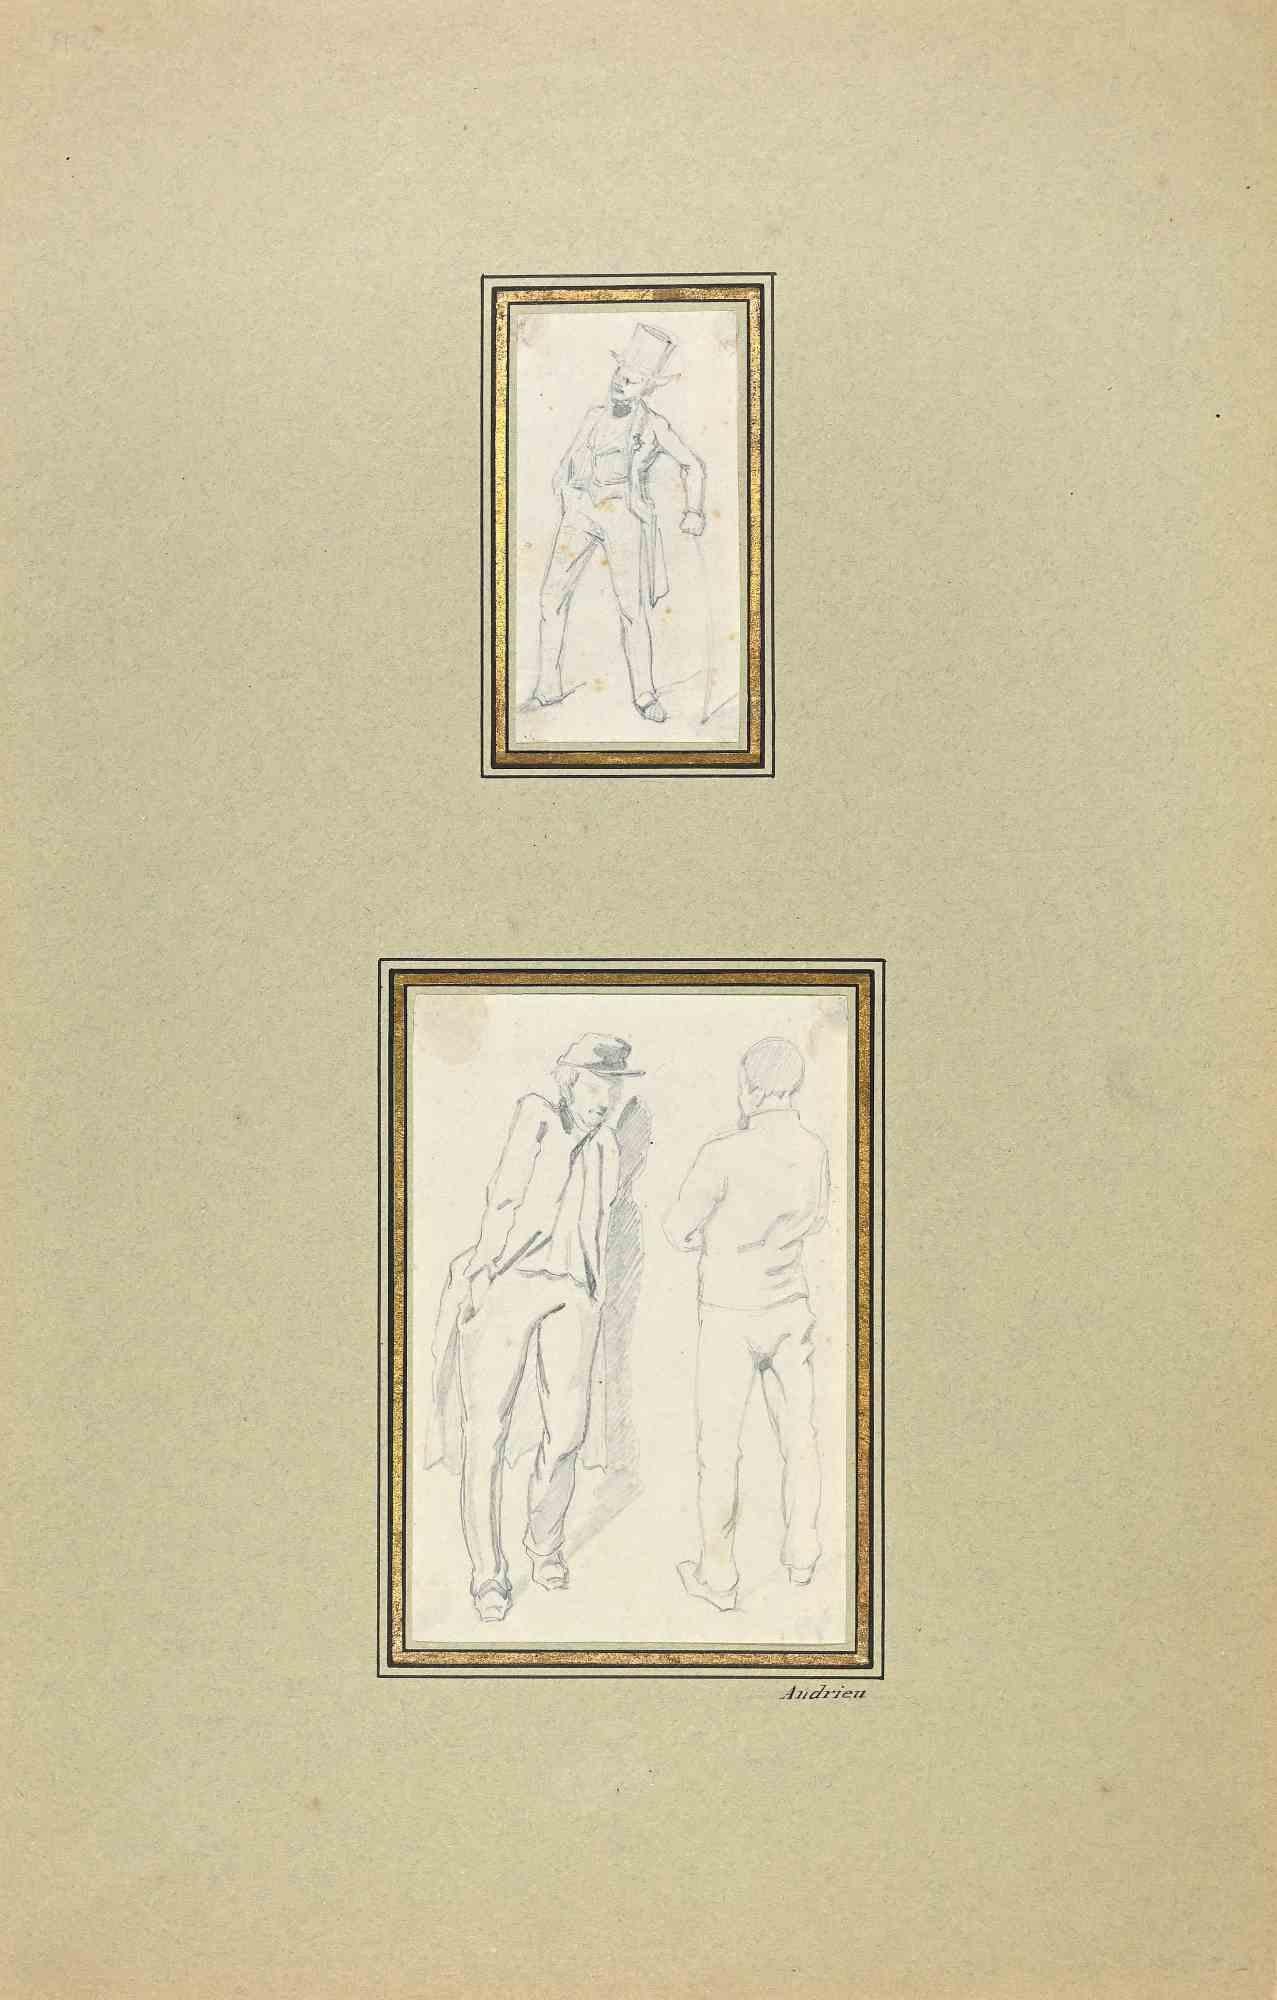 Figures is an Original Pencil Drawing realized by Pierre Andrieu (1821-1892).

The two little artworks represents elegant men.

Good condition included a light green cardboard.

Stamp signed.

Pierre Andrieu  (1821-1892) was a pupil of the famous